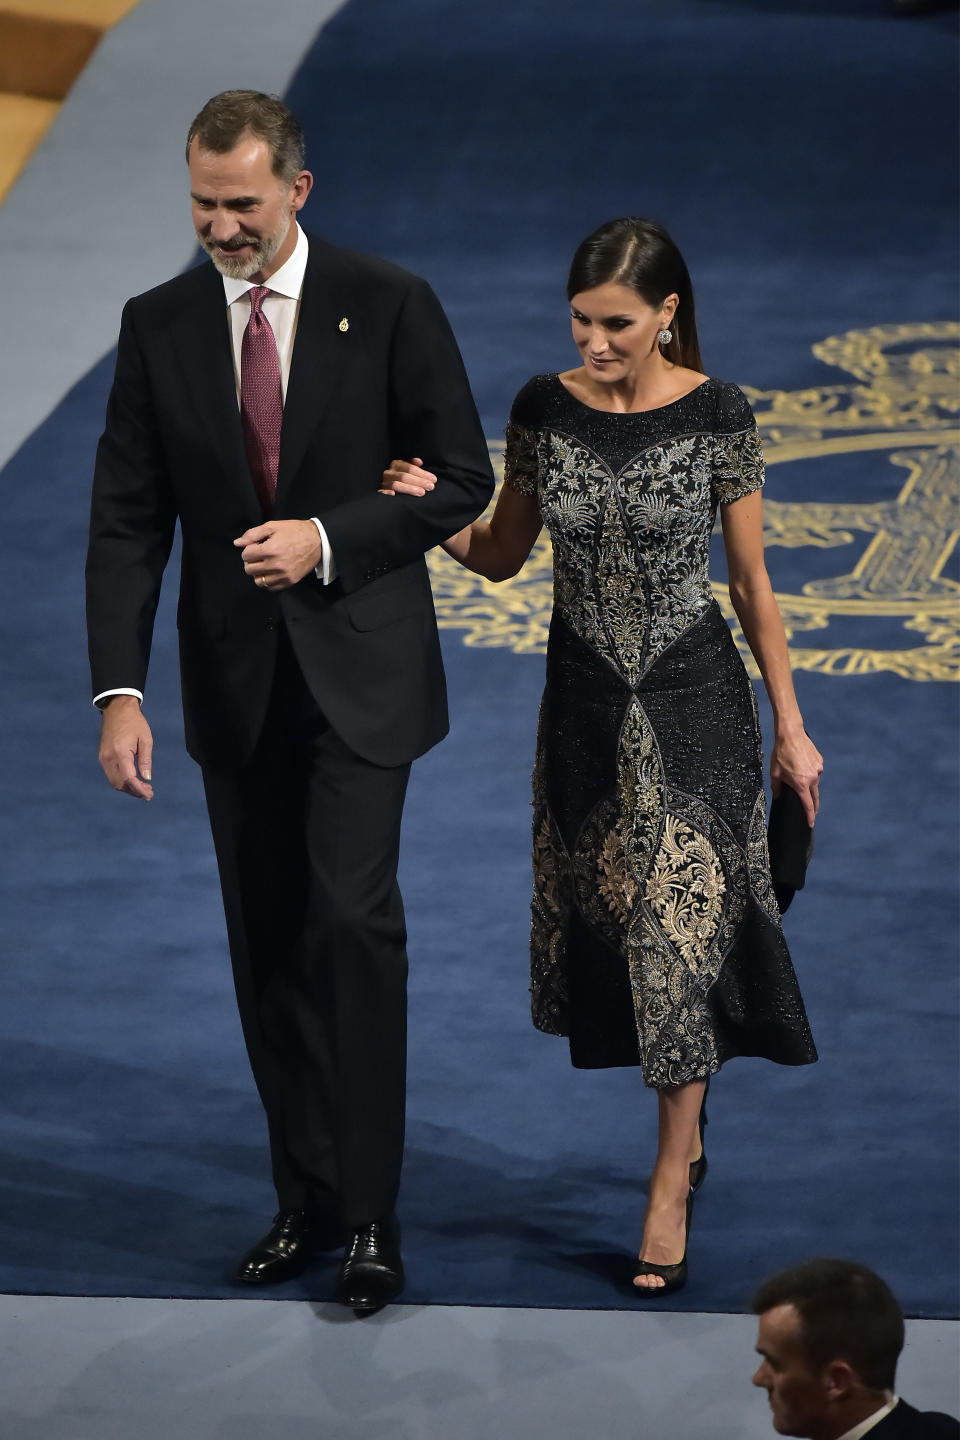 Spain's Kings Felipe VI and Letizia, leave the theatre at the end of ceremony of Princess Asturias Award in Oviedo, northern Spain, Friday Oct. 19, 2018. (AP Photo/Alvaro Barrientos)